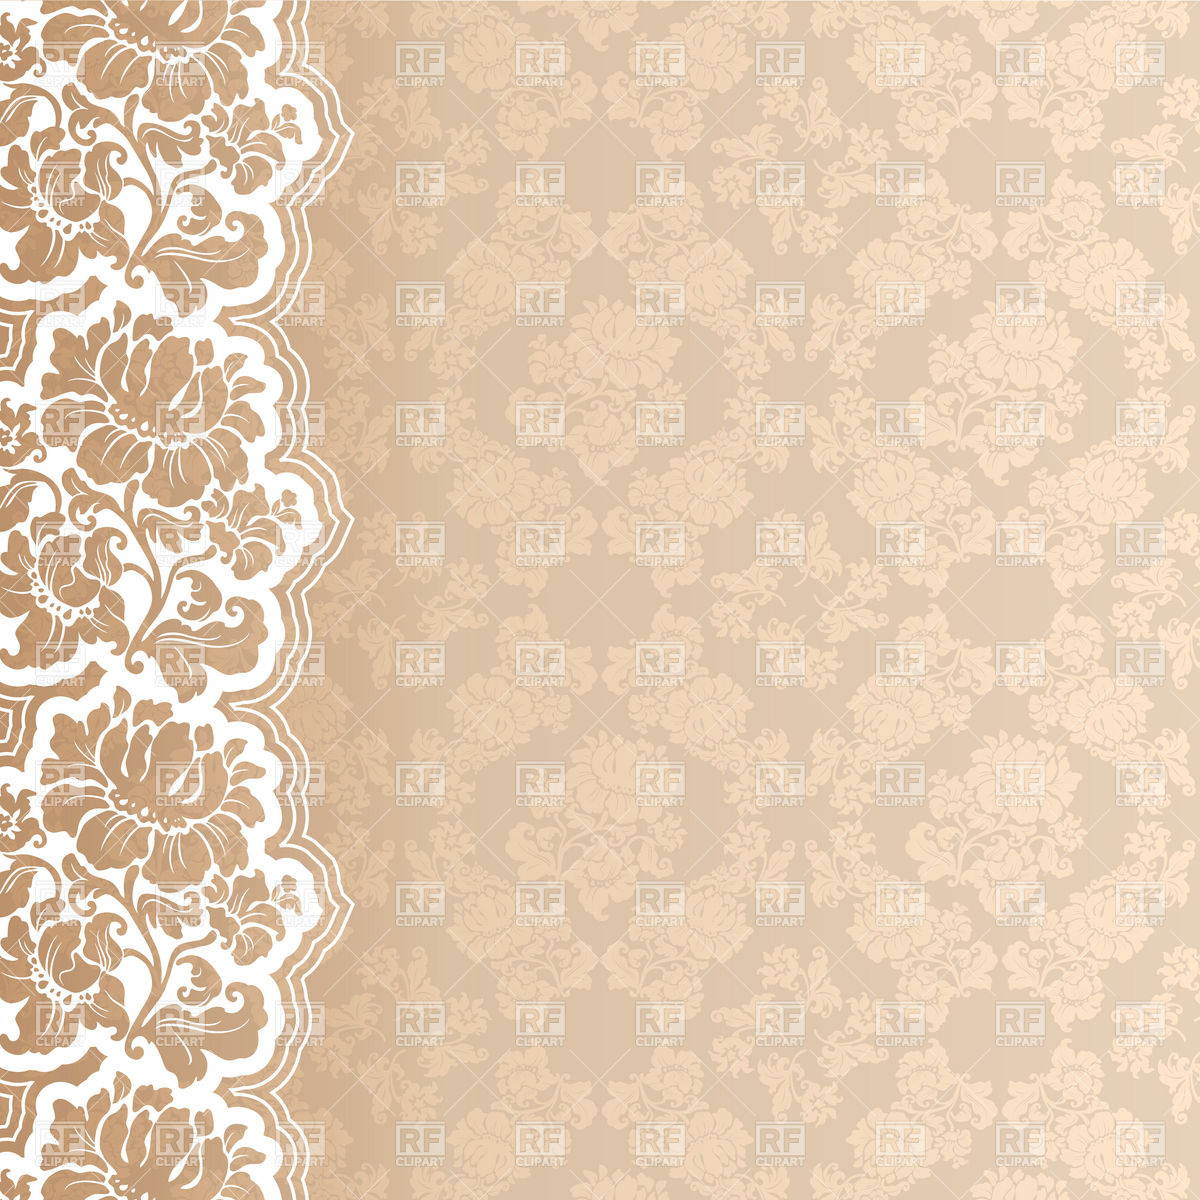 Floral Victorian Wallpaper With Lace Border 18741 Download Royalty